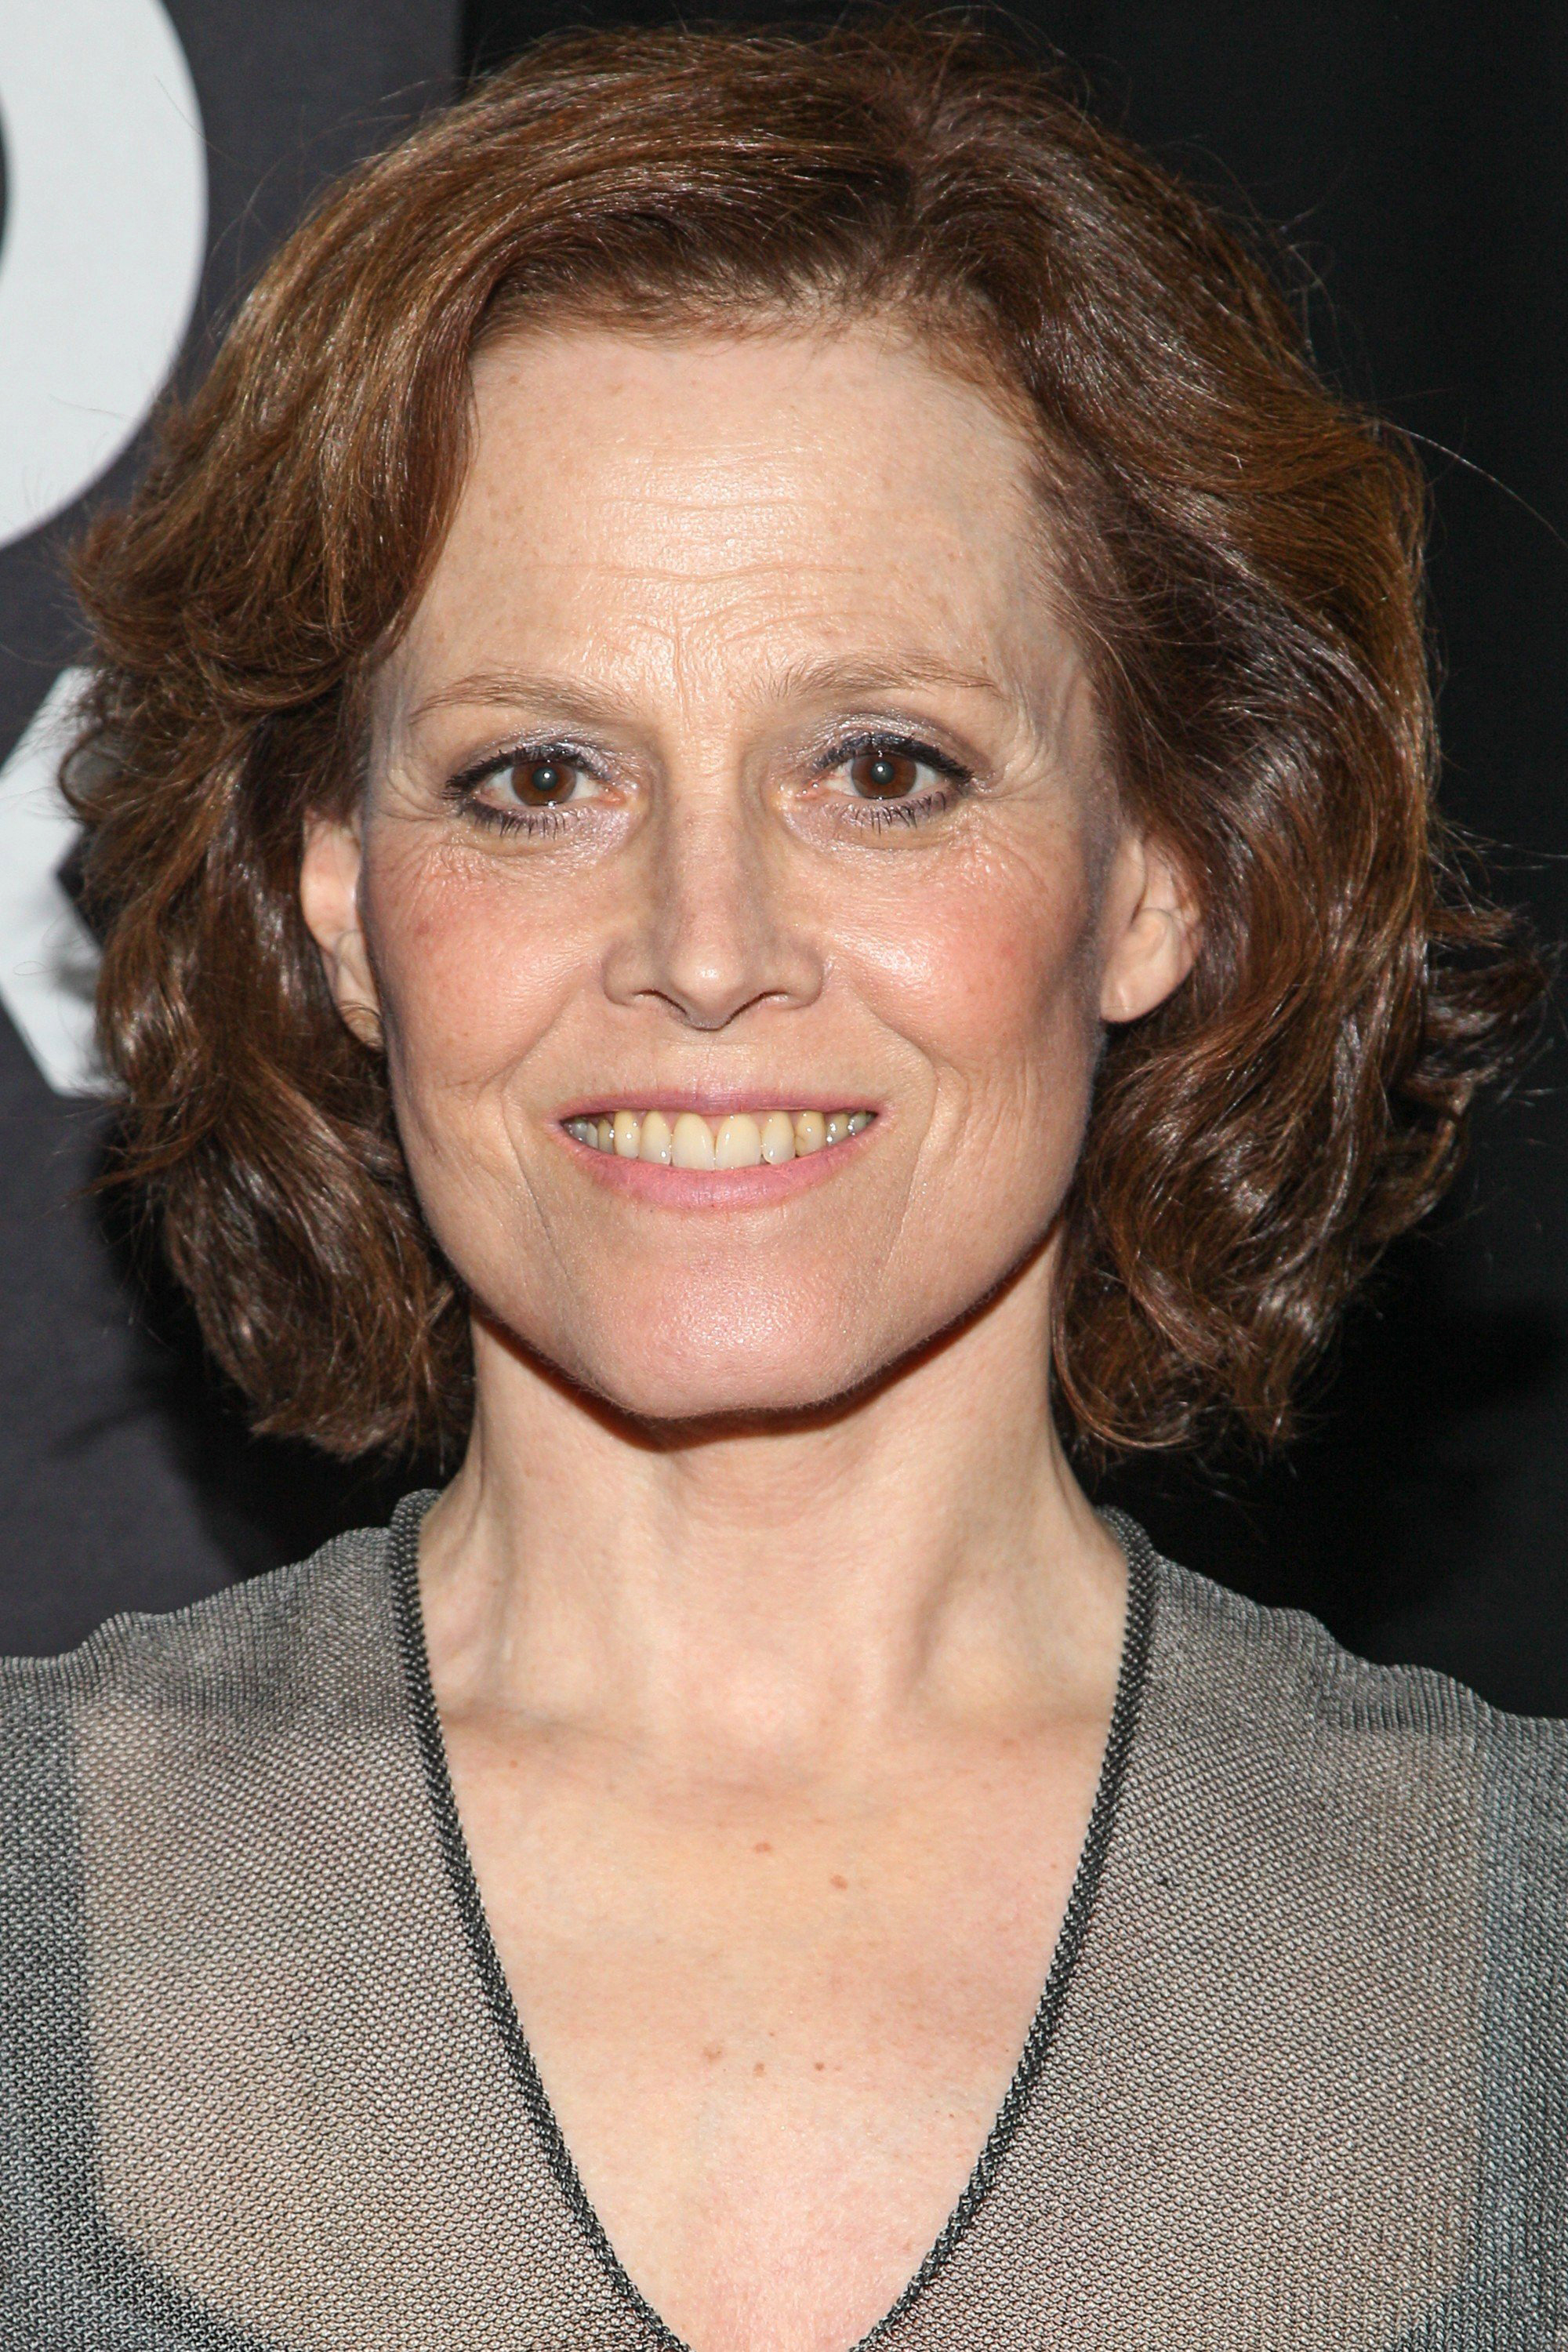 Sigourney Weaver attends the L.A. Times Hero Complex Film Festival 'Alien And Aliens' screening at TCL Chinese 6 Theatres on June 1, 2014 in Hollywood, Califor.